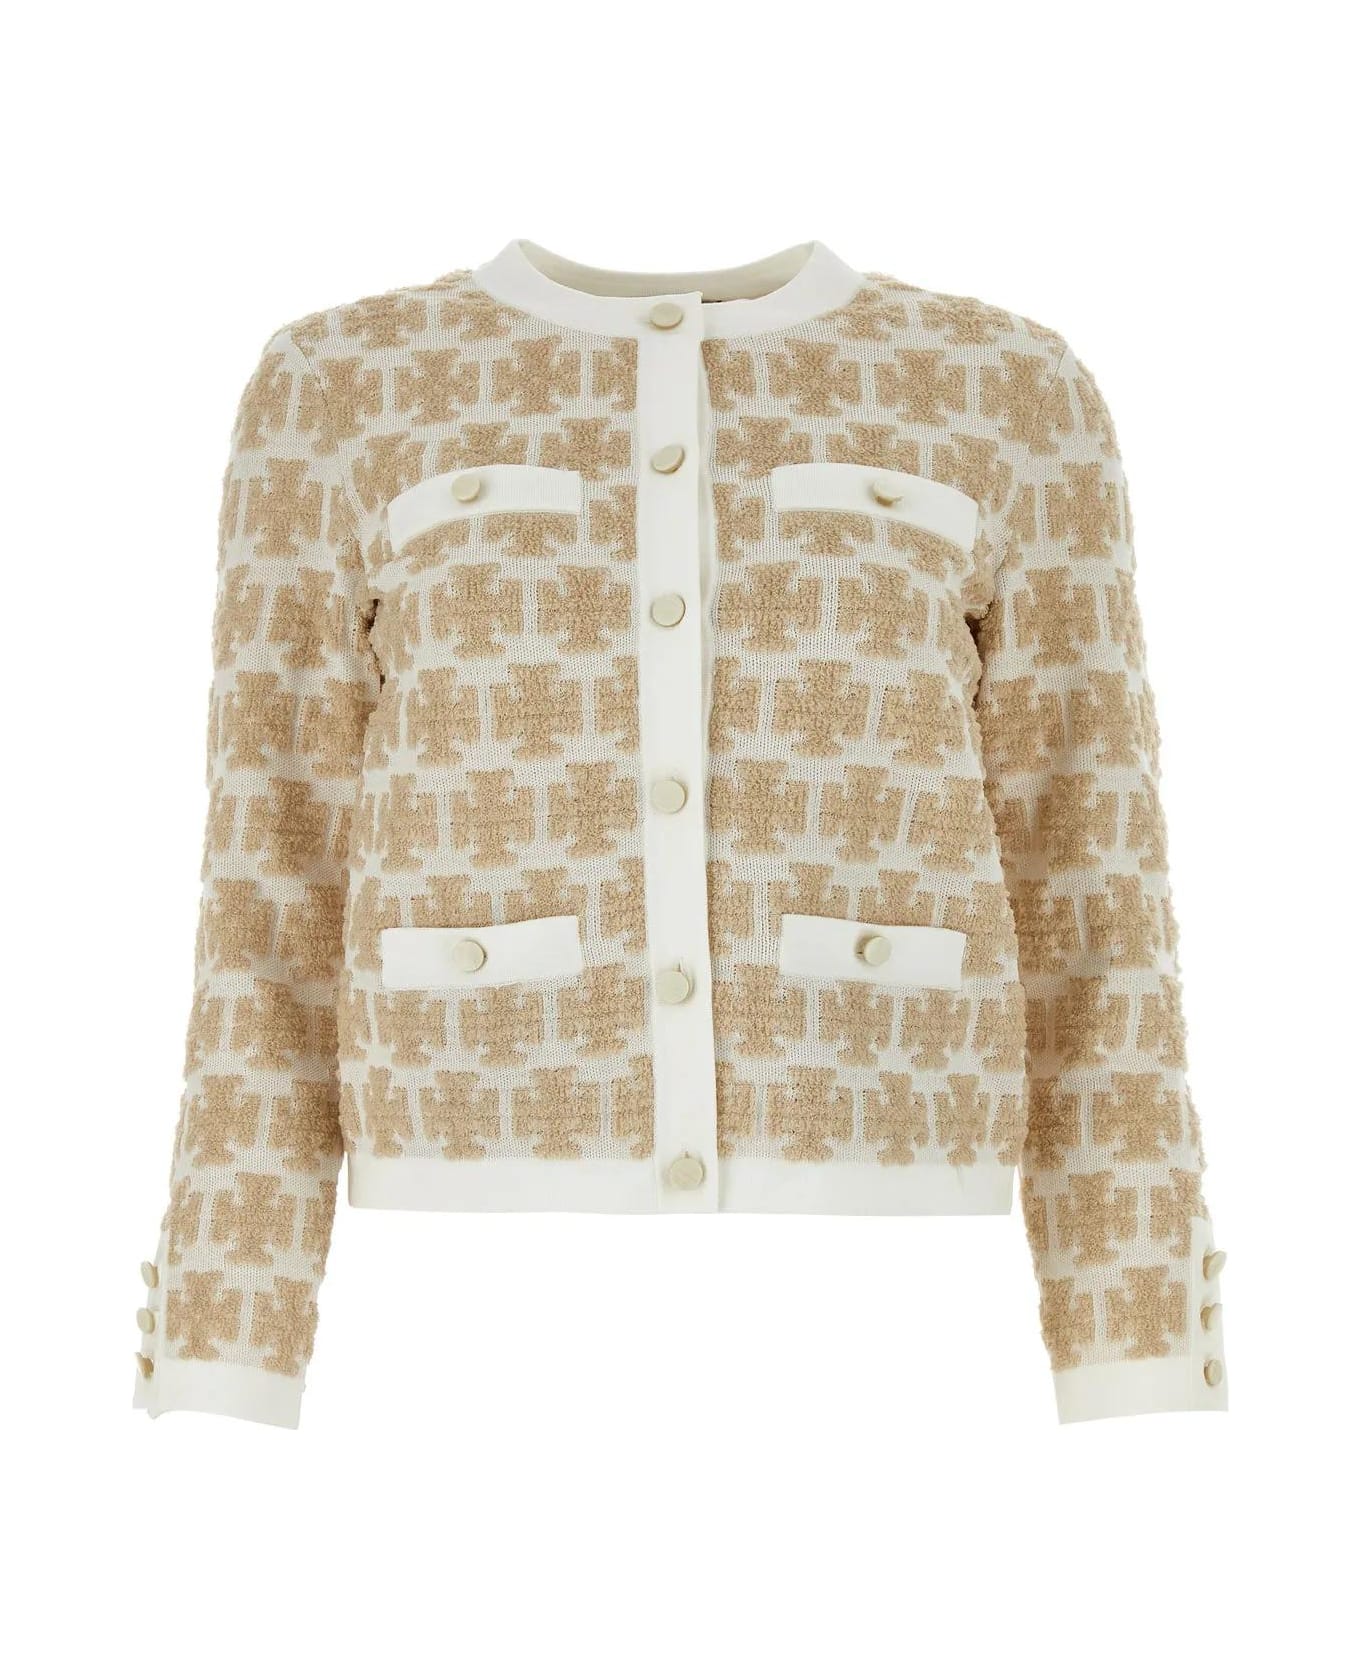 Tory Burch Embroidered Polyester Blend Cardigan - WHITE カーディガン